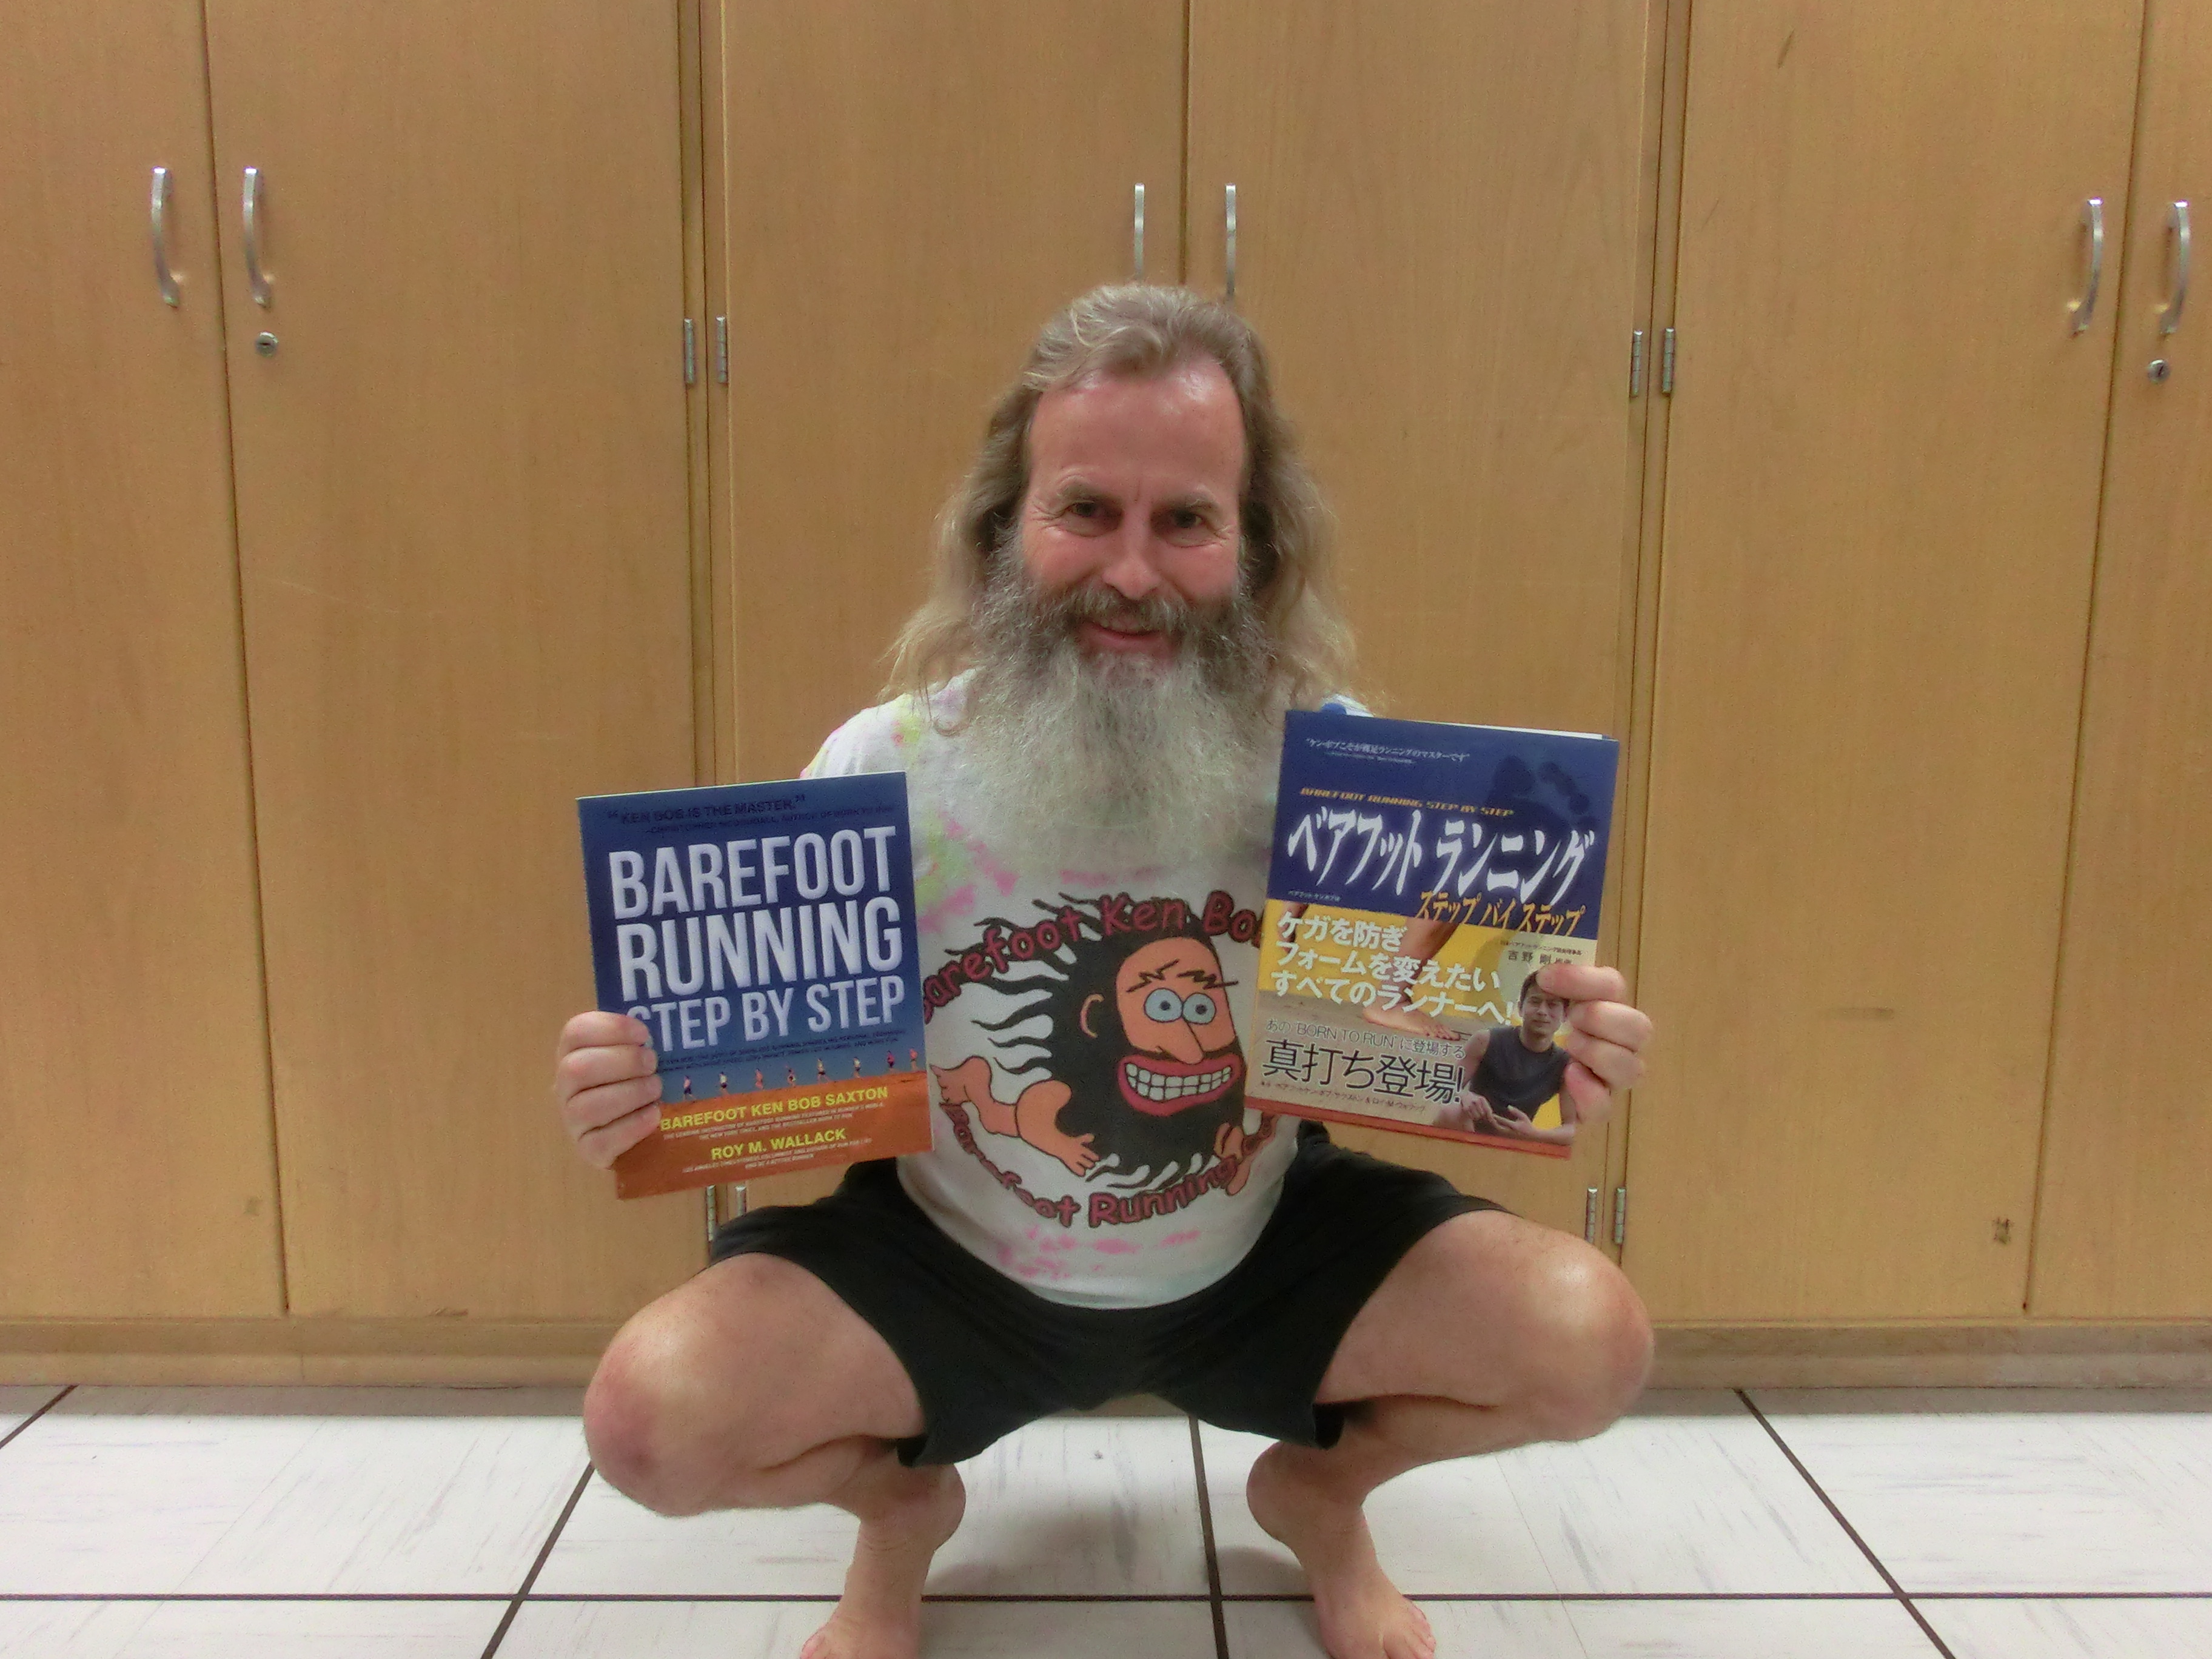 Ken Bob Saxton with Barefoot Running Step by Step in English and Japanese